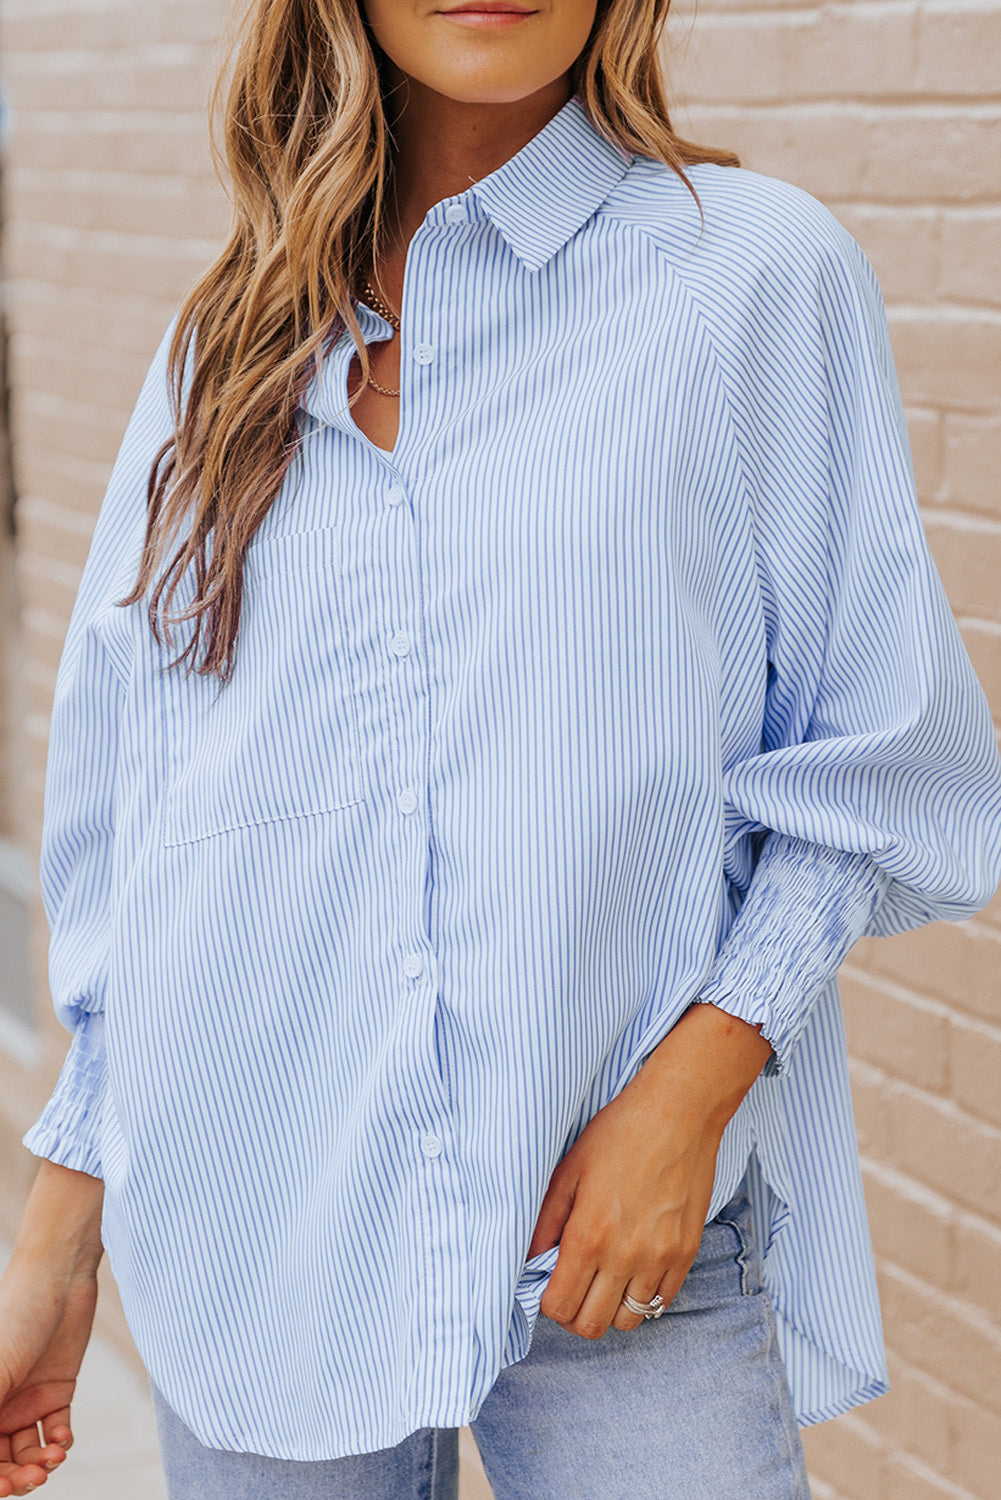 Restocked! All Business Striped Lantern Sleeve Collared Shirt